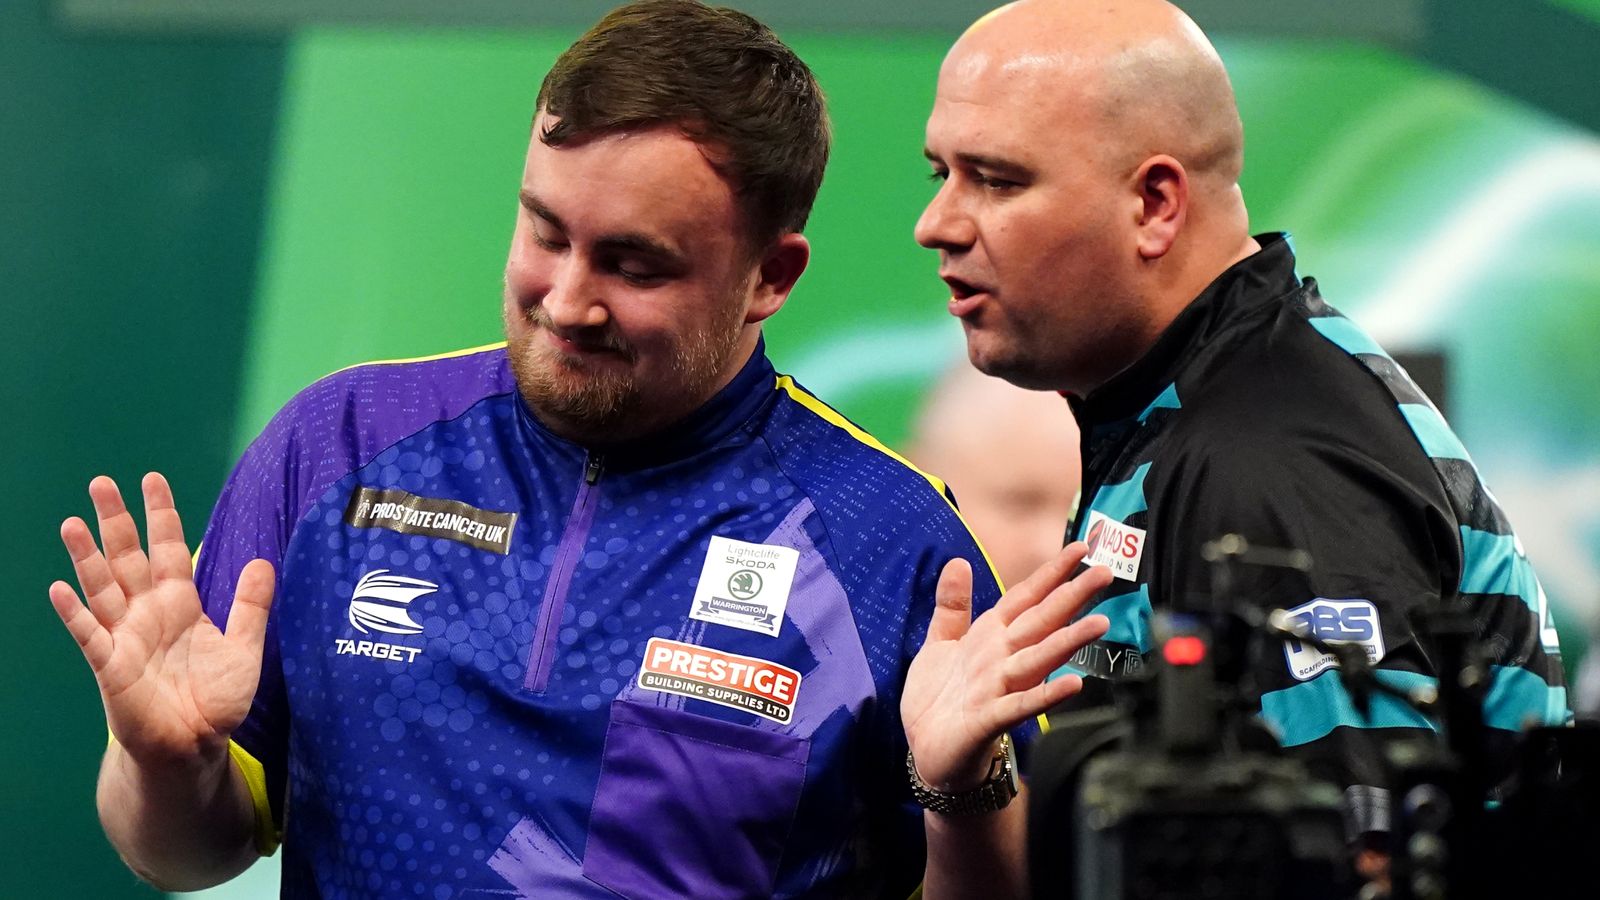 Premier League Darts: Luke Littler moves clear at top of table with 6-2 Rob Cross demolition in Liverpool | Darts News